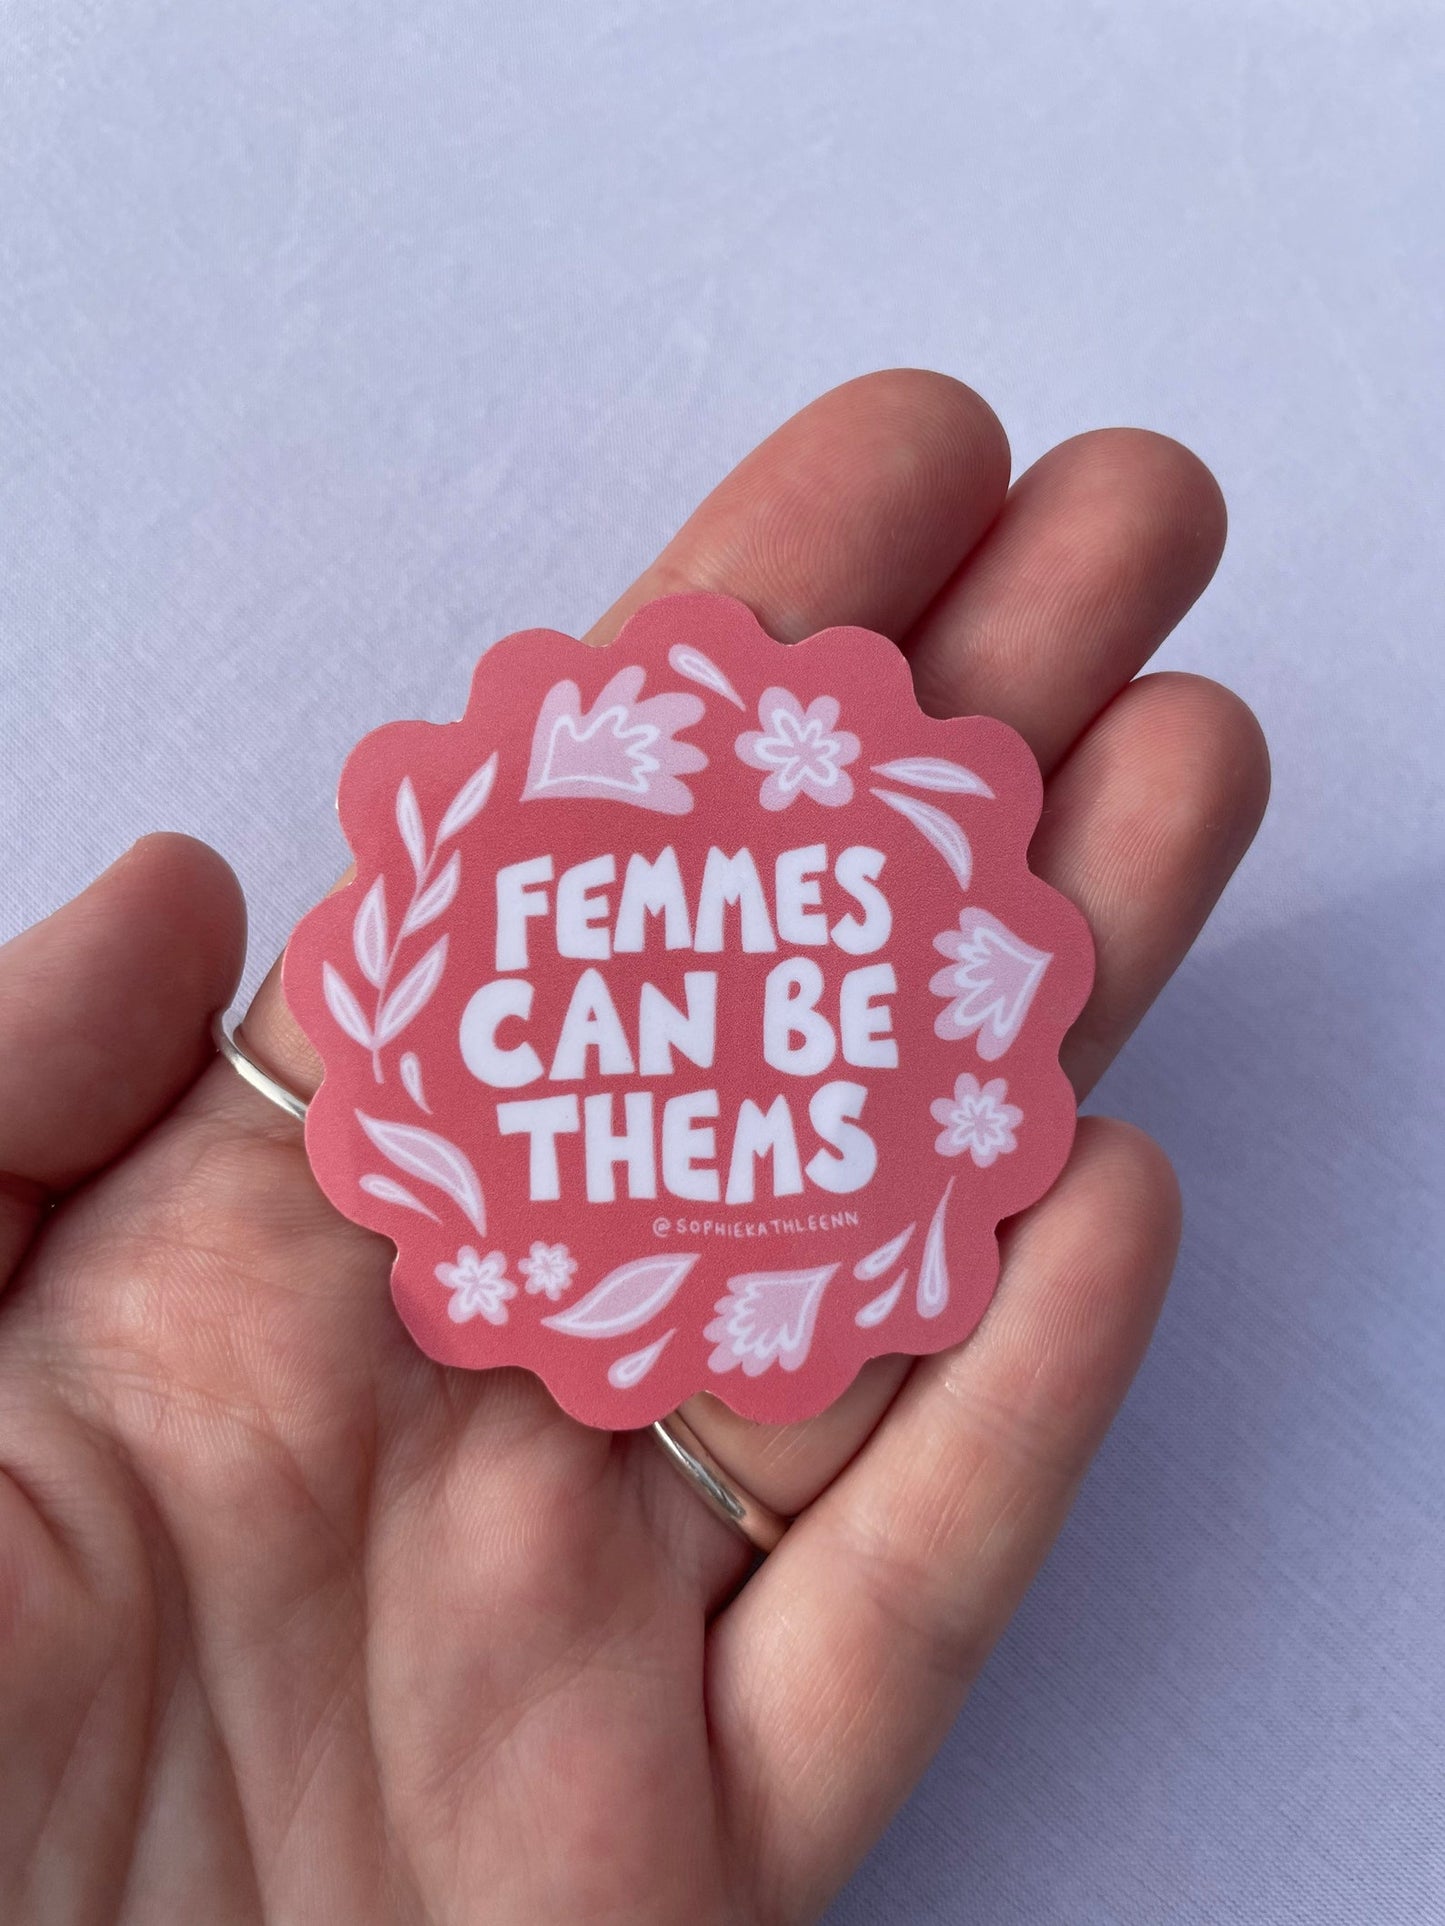 Femmes can be thems sticker